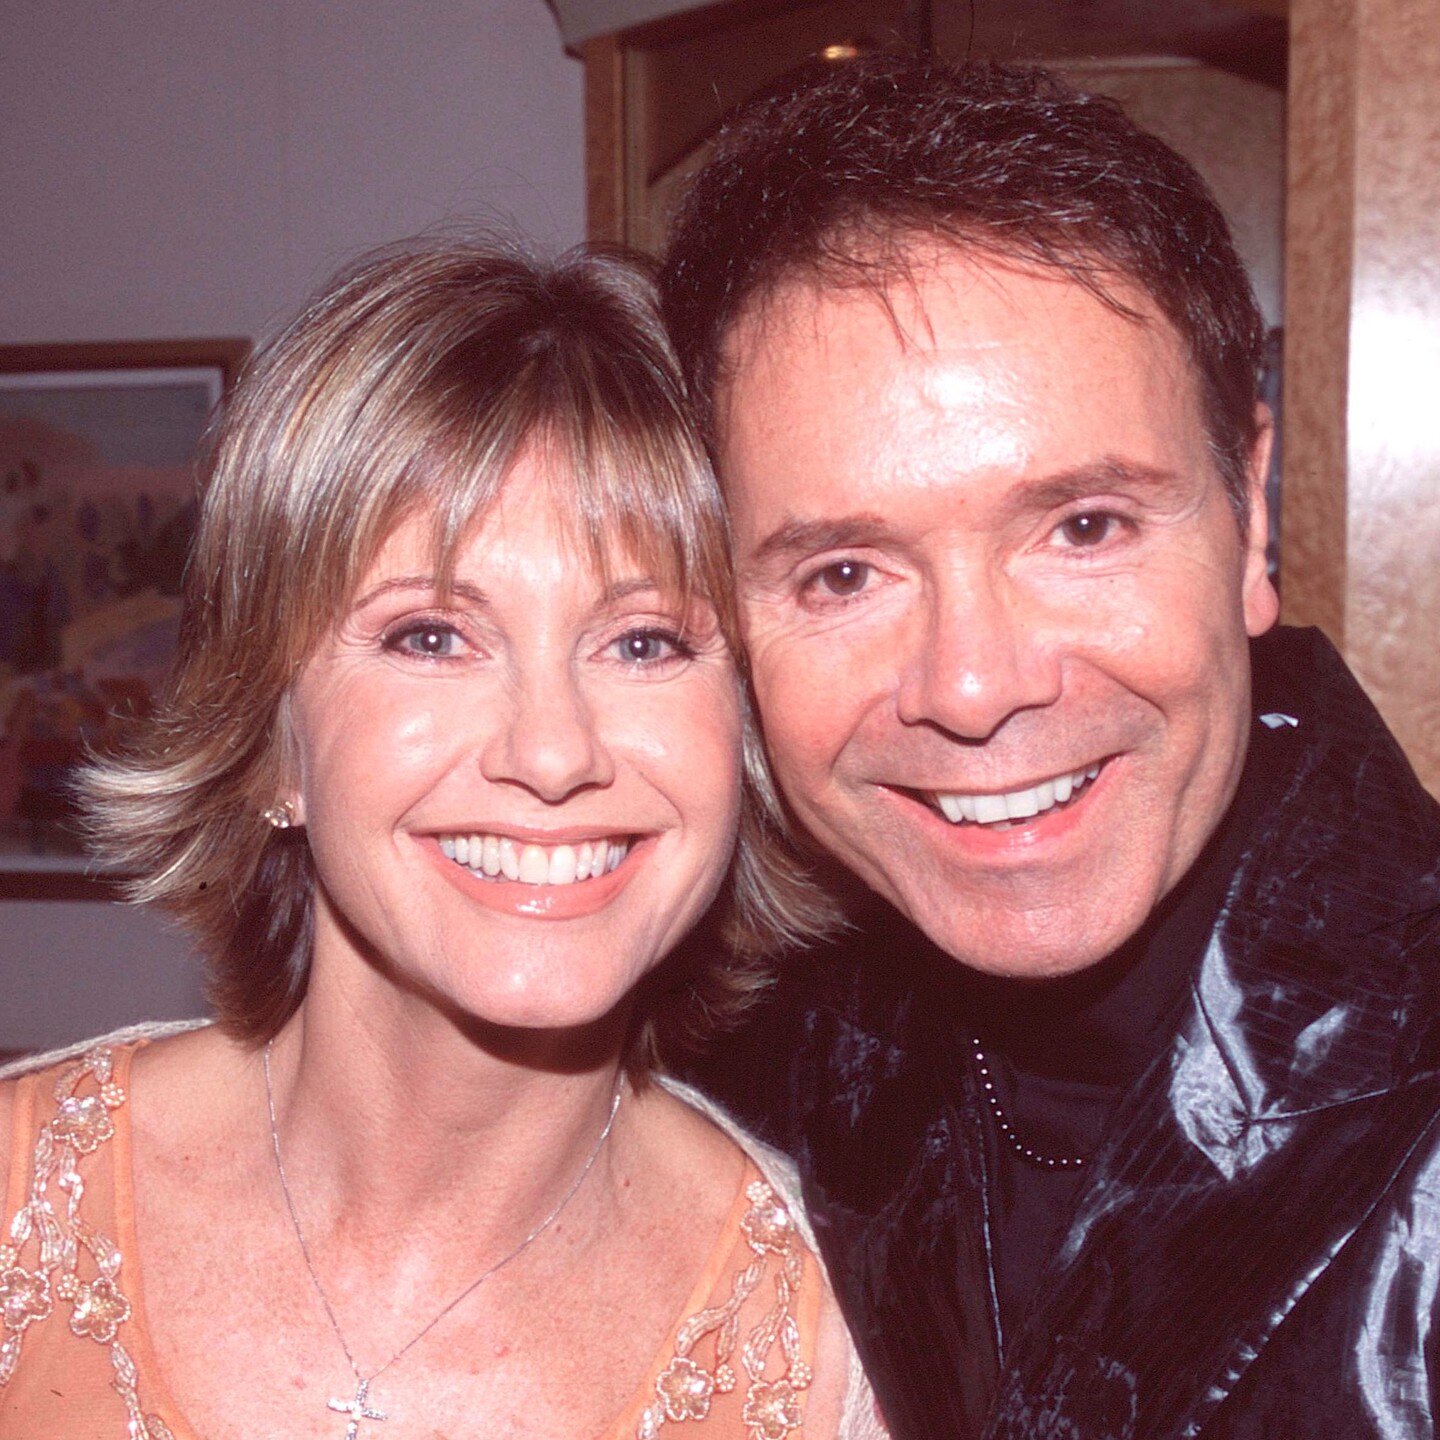 I will never forget the day Cliff Richard introduced me to Olivia Newton John. I was so excited, I could hardly speak and my legs turned to jelly. Mind you it's not everyday you get introduced to your school boy crush on a yacht in Monte Carlo! That 